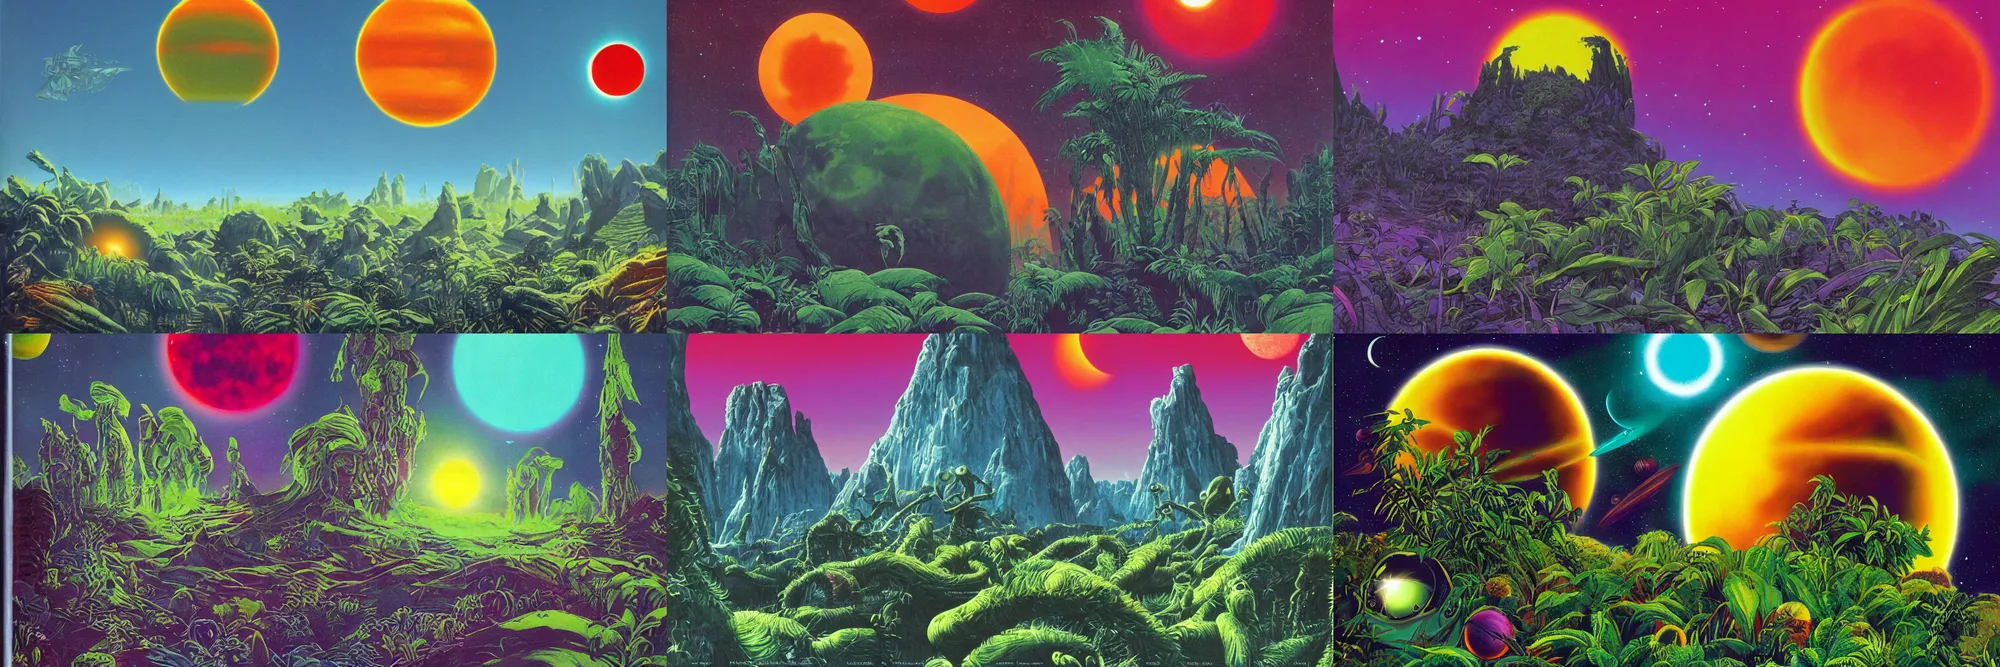 Prompt: alien planet biome, 8 0's sci - fi book cover, lush and colorful eclipse, extraterrestrial plants novel